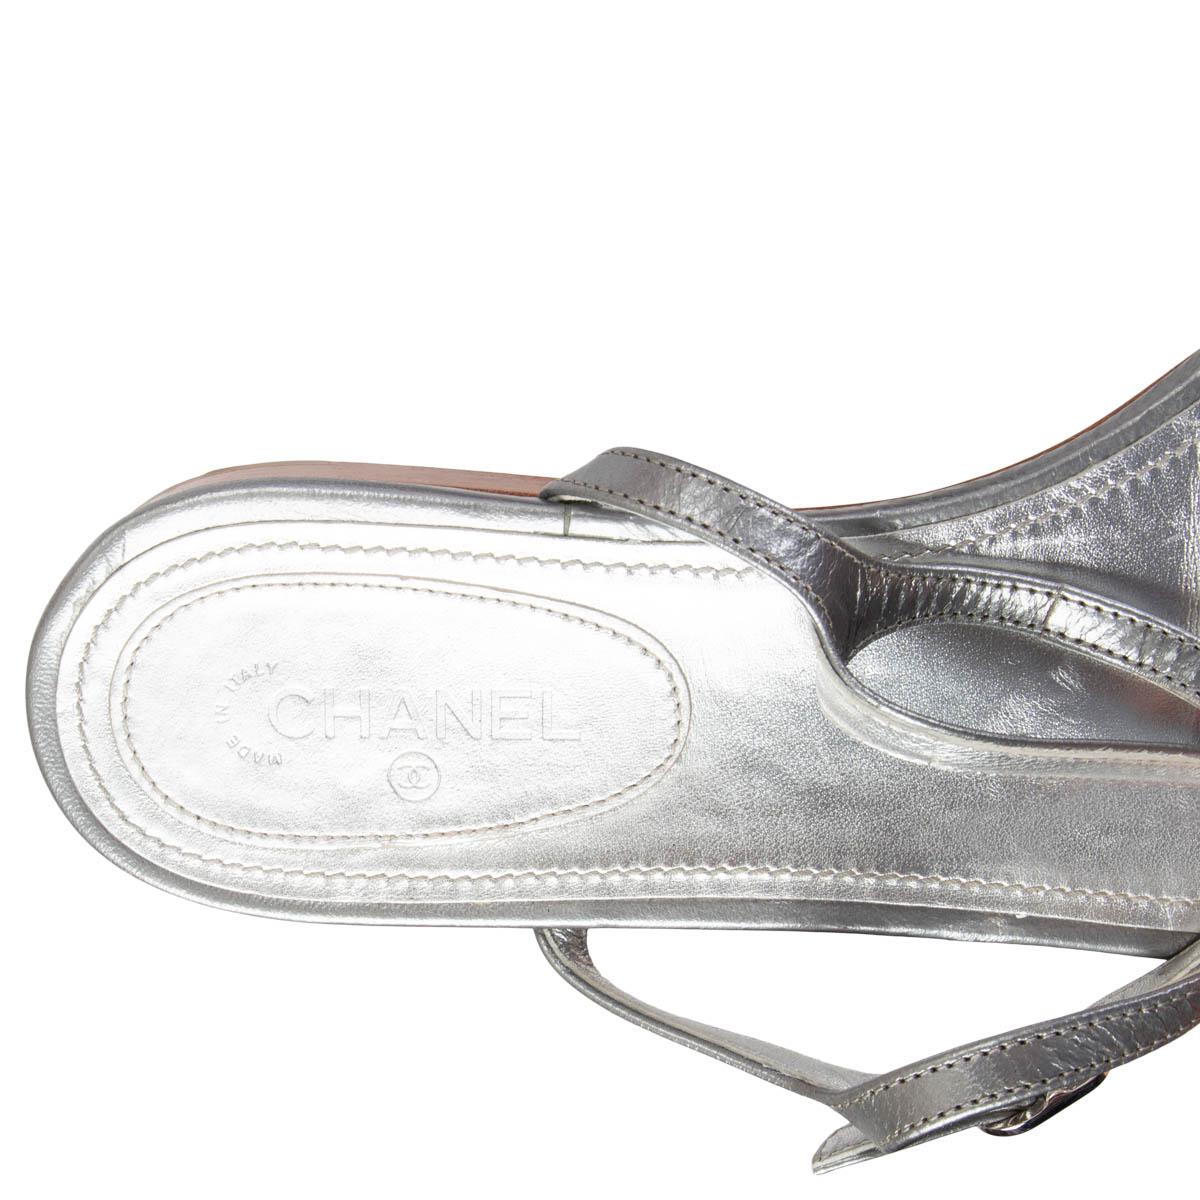 Silver CHANEL silver leather 2019 STONE EMBELLISHED CC Flat Sandals Shoes 39 C